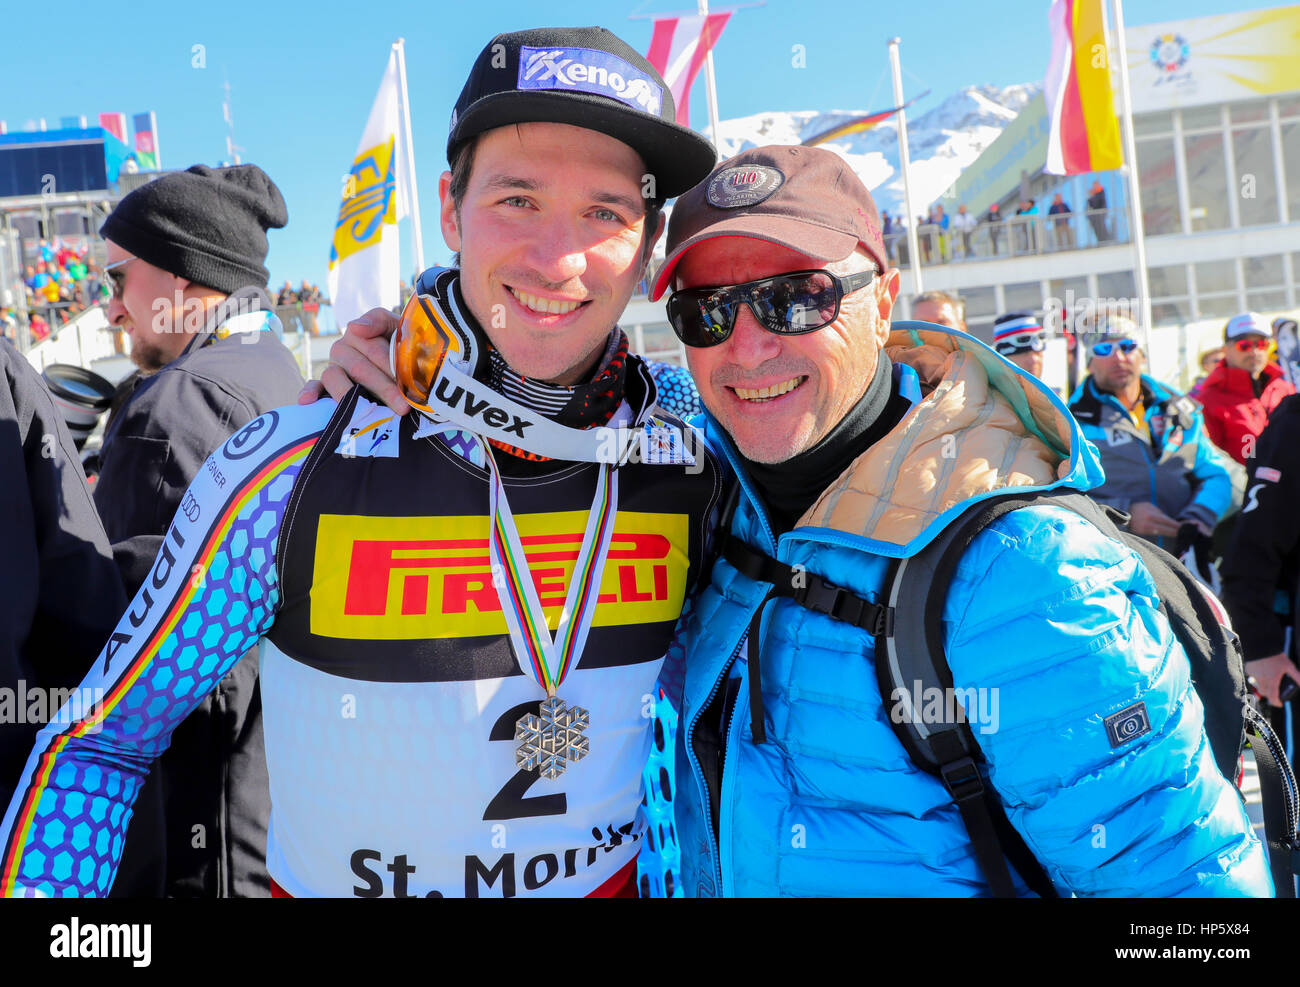 Felix Neuruther from Germany and his father, former professional skier Christian Neureuther, celebrate after the 2nd round of the men's slalom at the Alpine Skiing World Championship in St. Moritz, Switzerland, 19 February 2017. Photo: Michael Kappeler/dpa Stock Photo